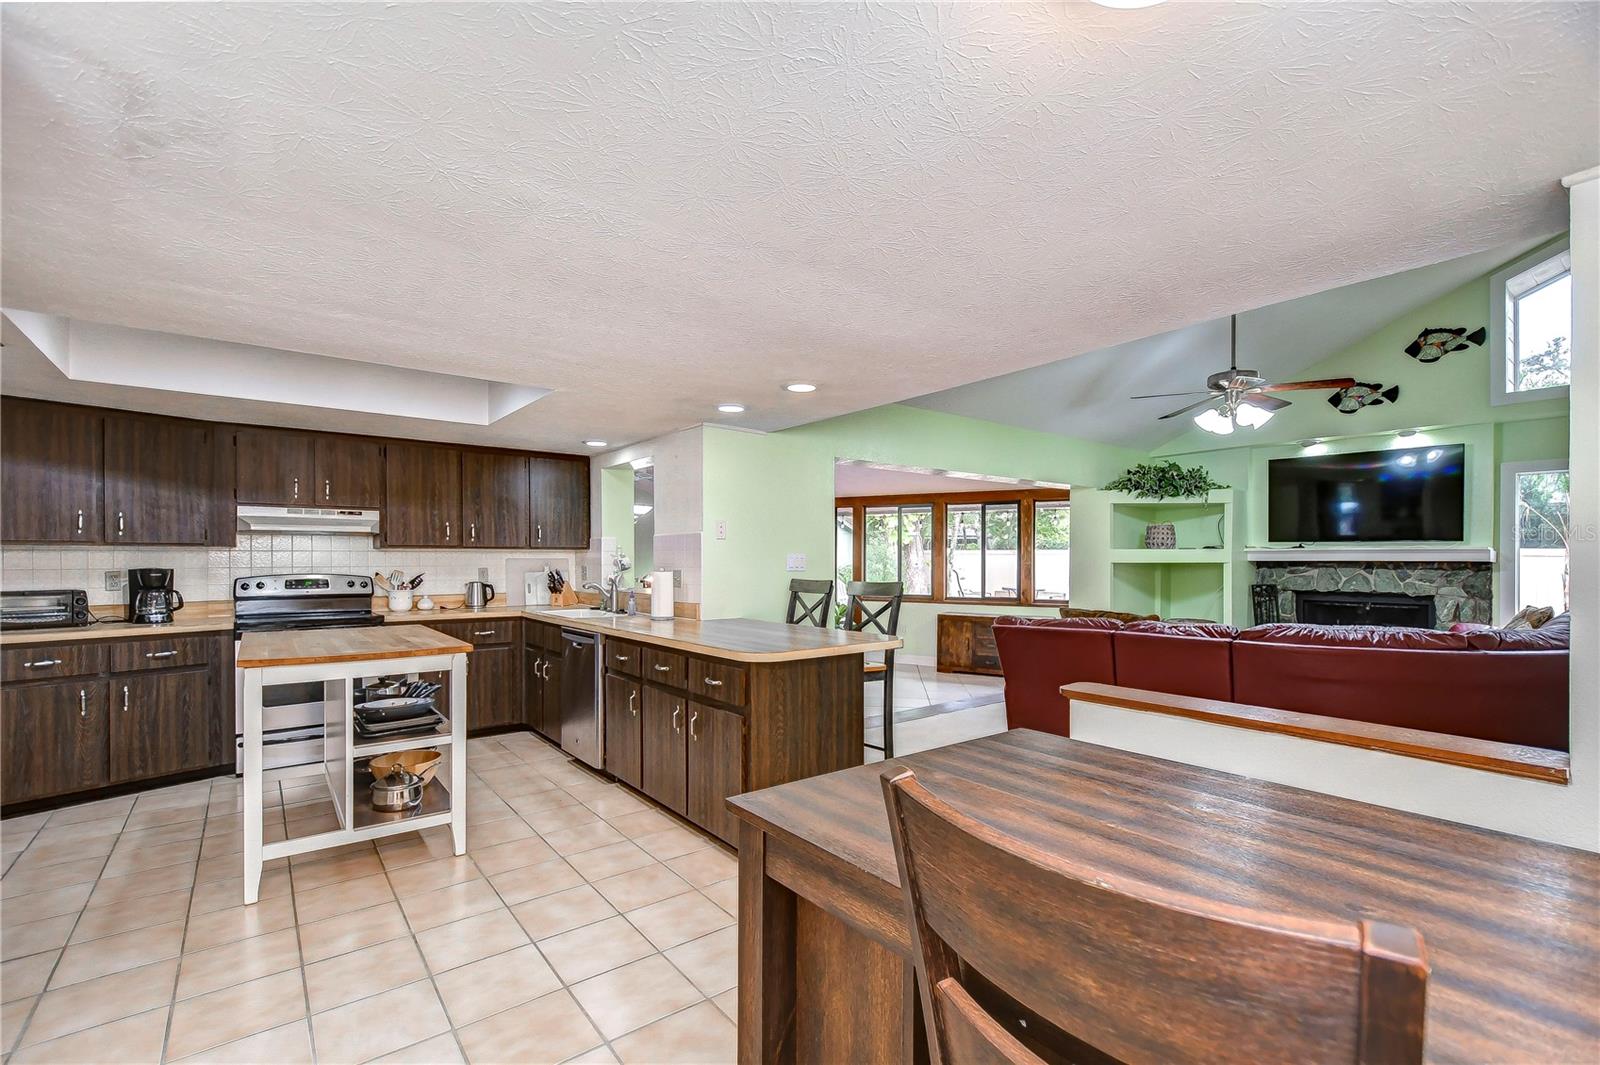 Spacious kitchen offers tons of cabinet and counterspace!